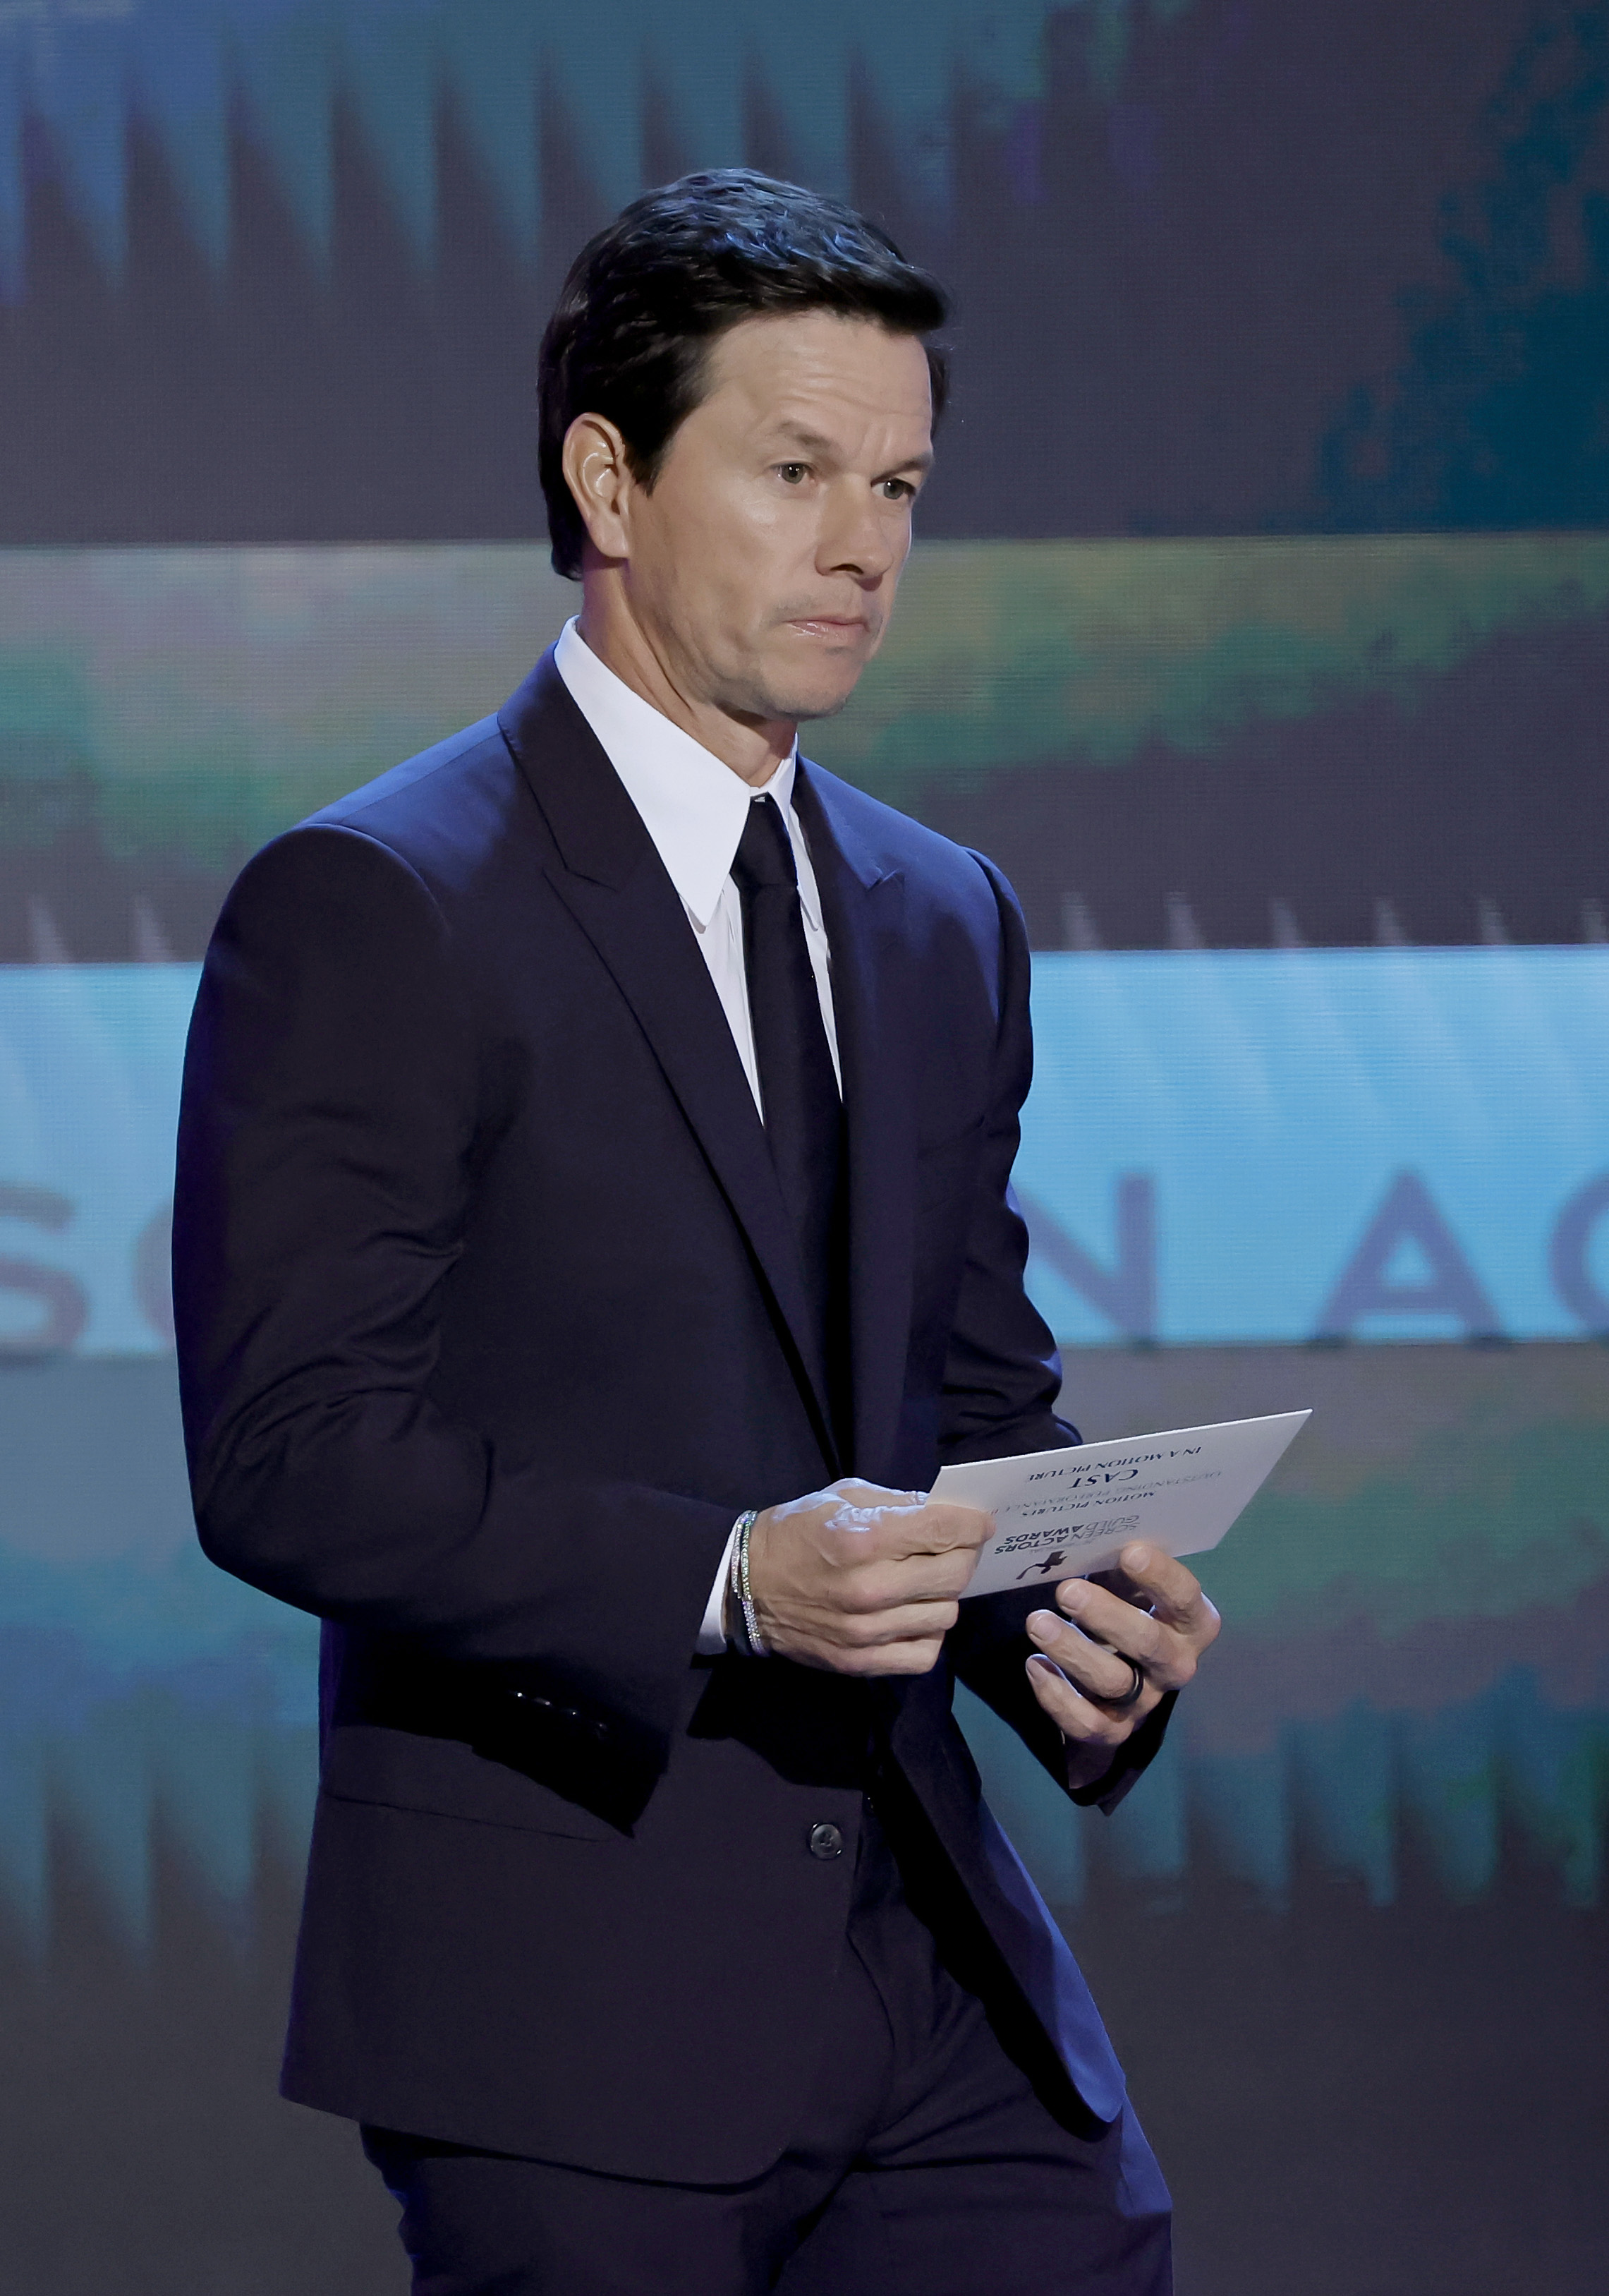 Mark Wahlberg speaks onstage during the 29th Annual Screen Actors Guild Awards in Los Angeles, California on February 26, 2023 | Source: Getty Images